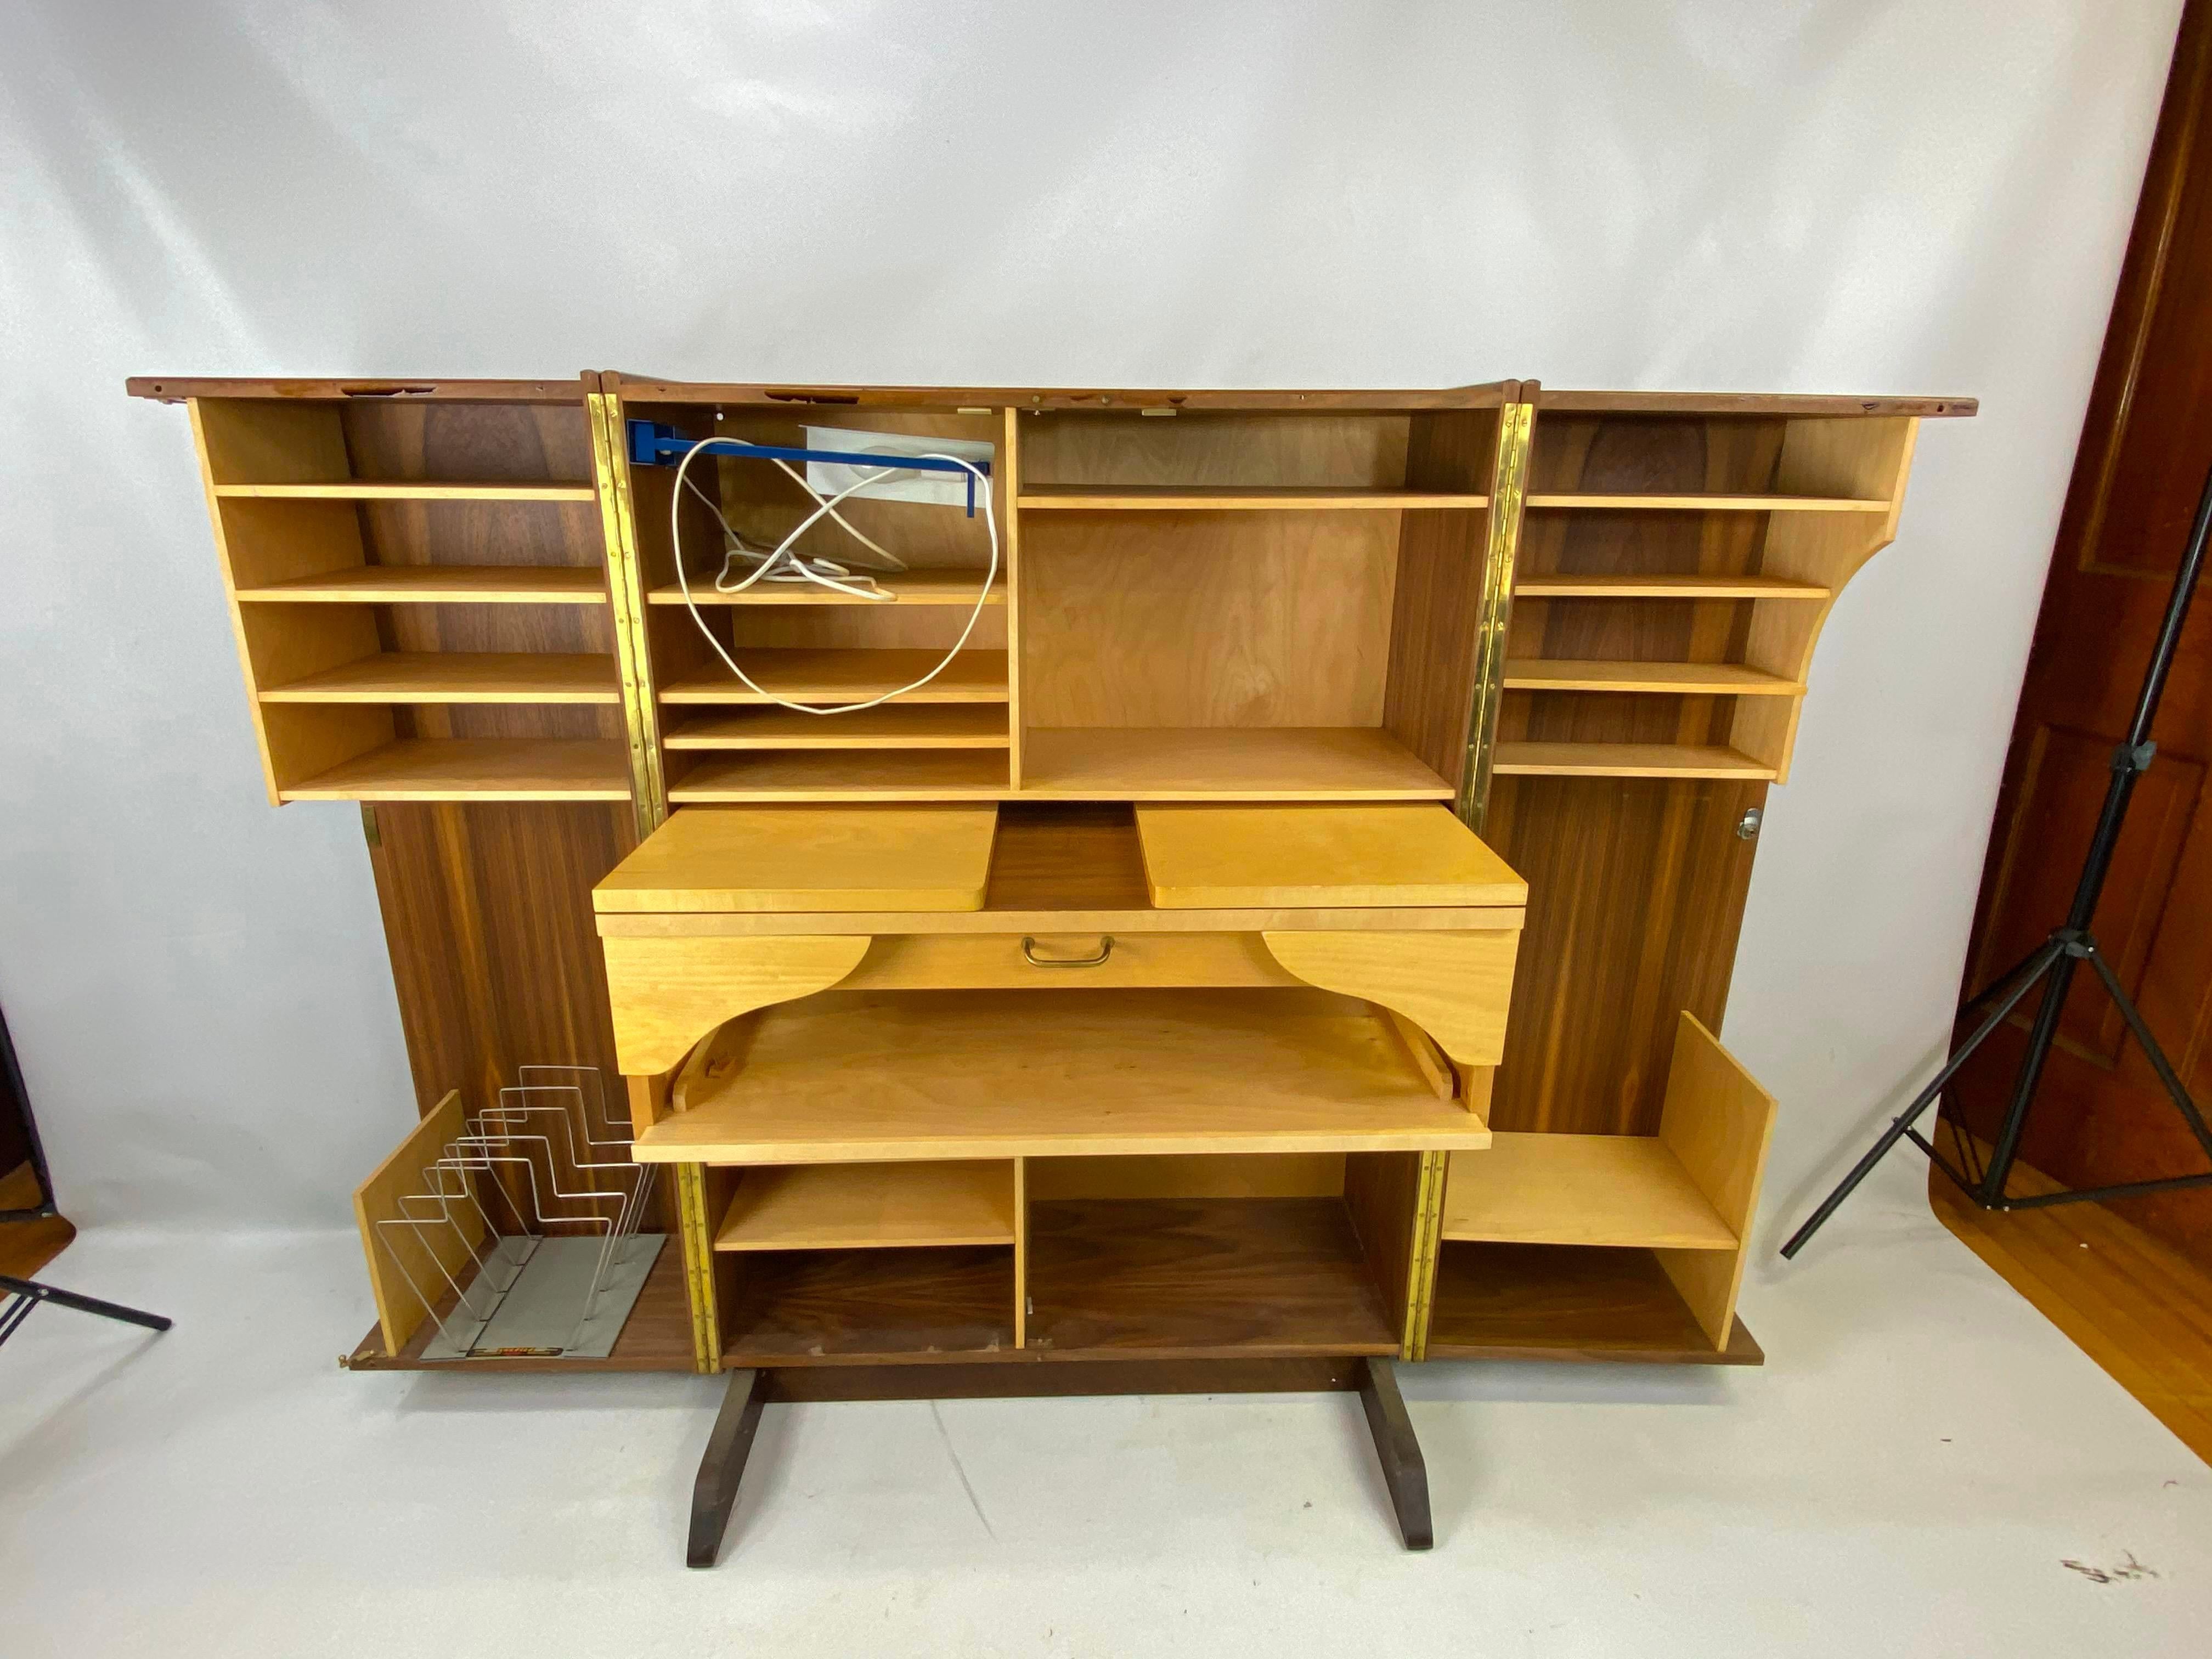 Mid-Century Modern Norway folding desk in a box. Great piece of furniture. Very solid and great for smaller spaces.